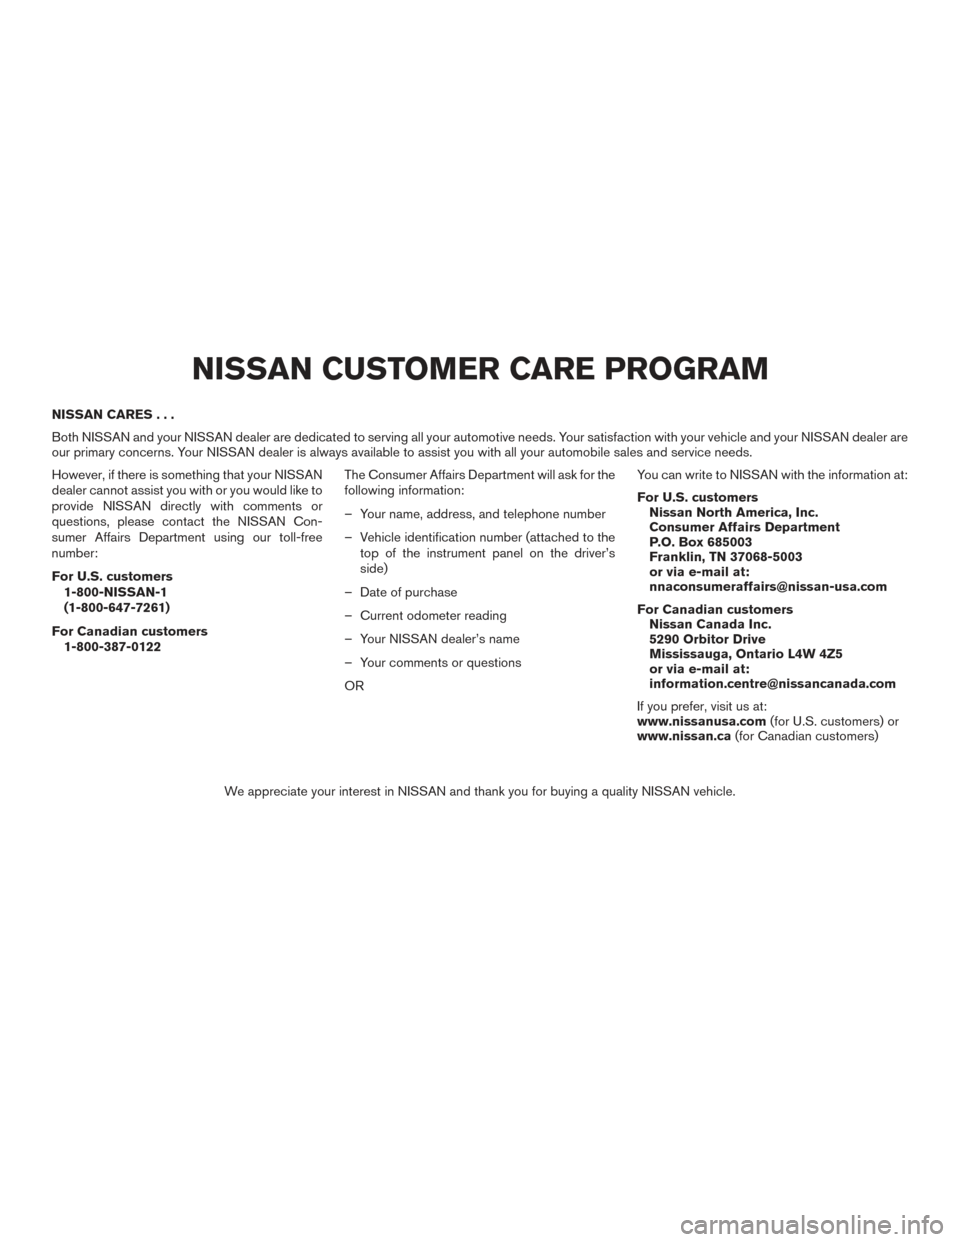 NISSAN FRONTIER 2017 D23 / 3.G Owners Manual NISSAN CARES...
Both NISSAN and your NISSAN dealer are dedicated to serving all your automotive needs. Your satisfaction with your vehicle and your NISSAN dealer are
our primary concerns. Your NISSAN 